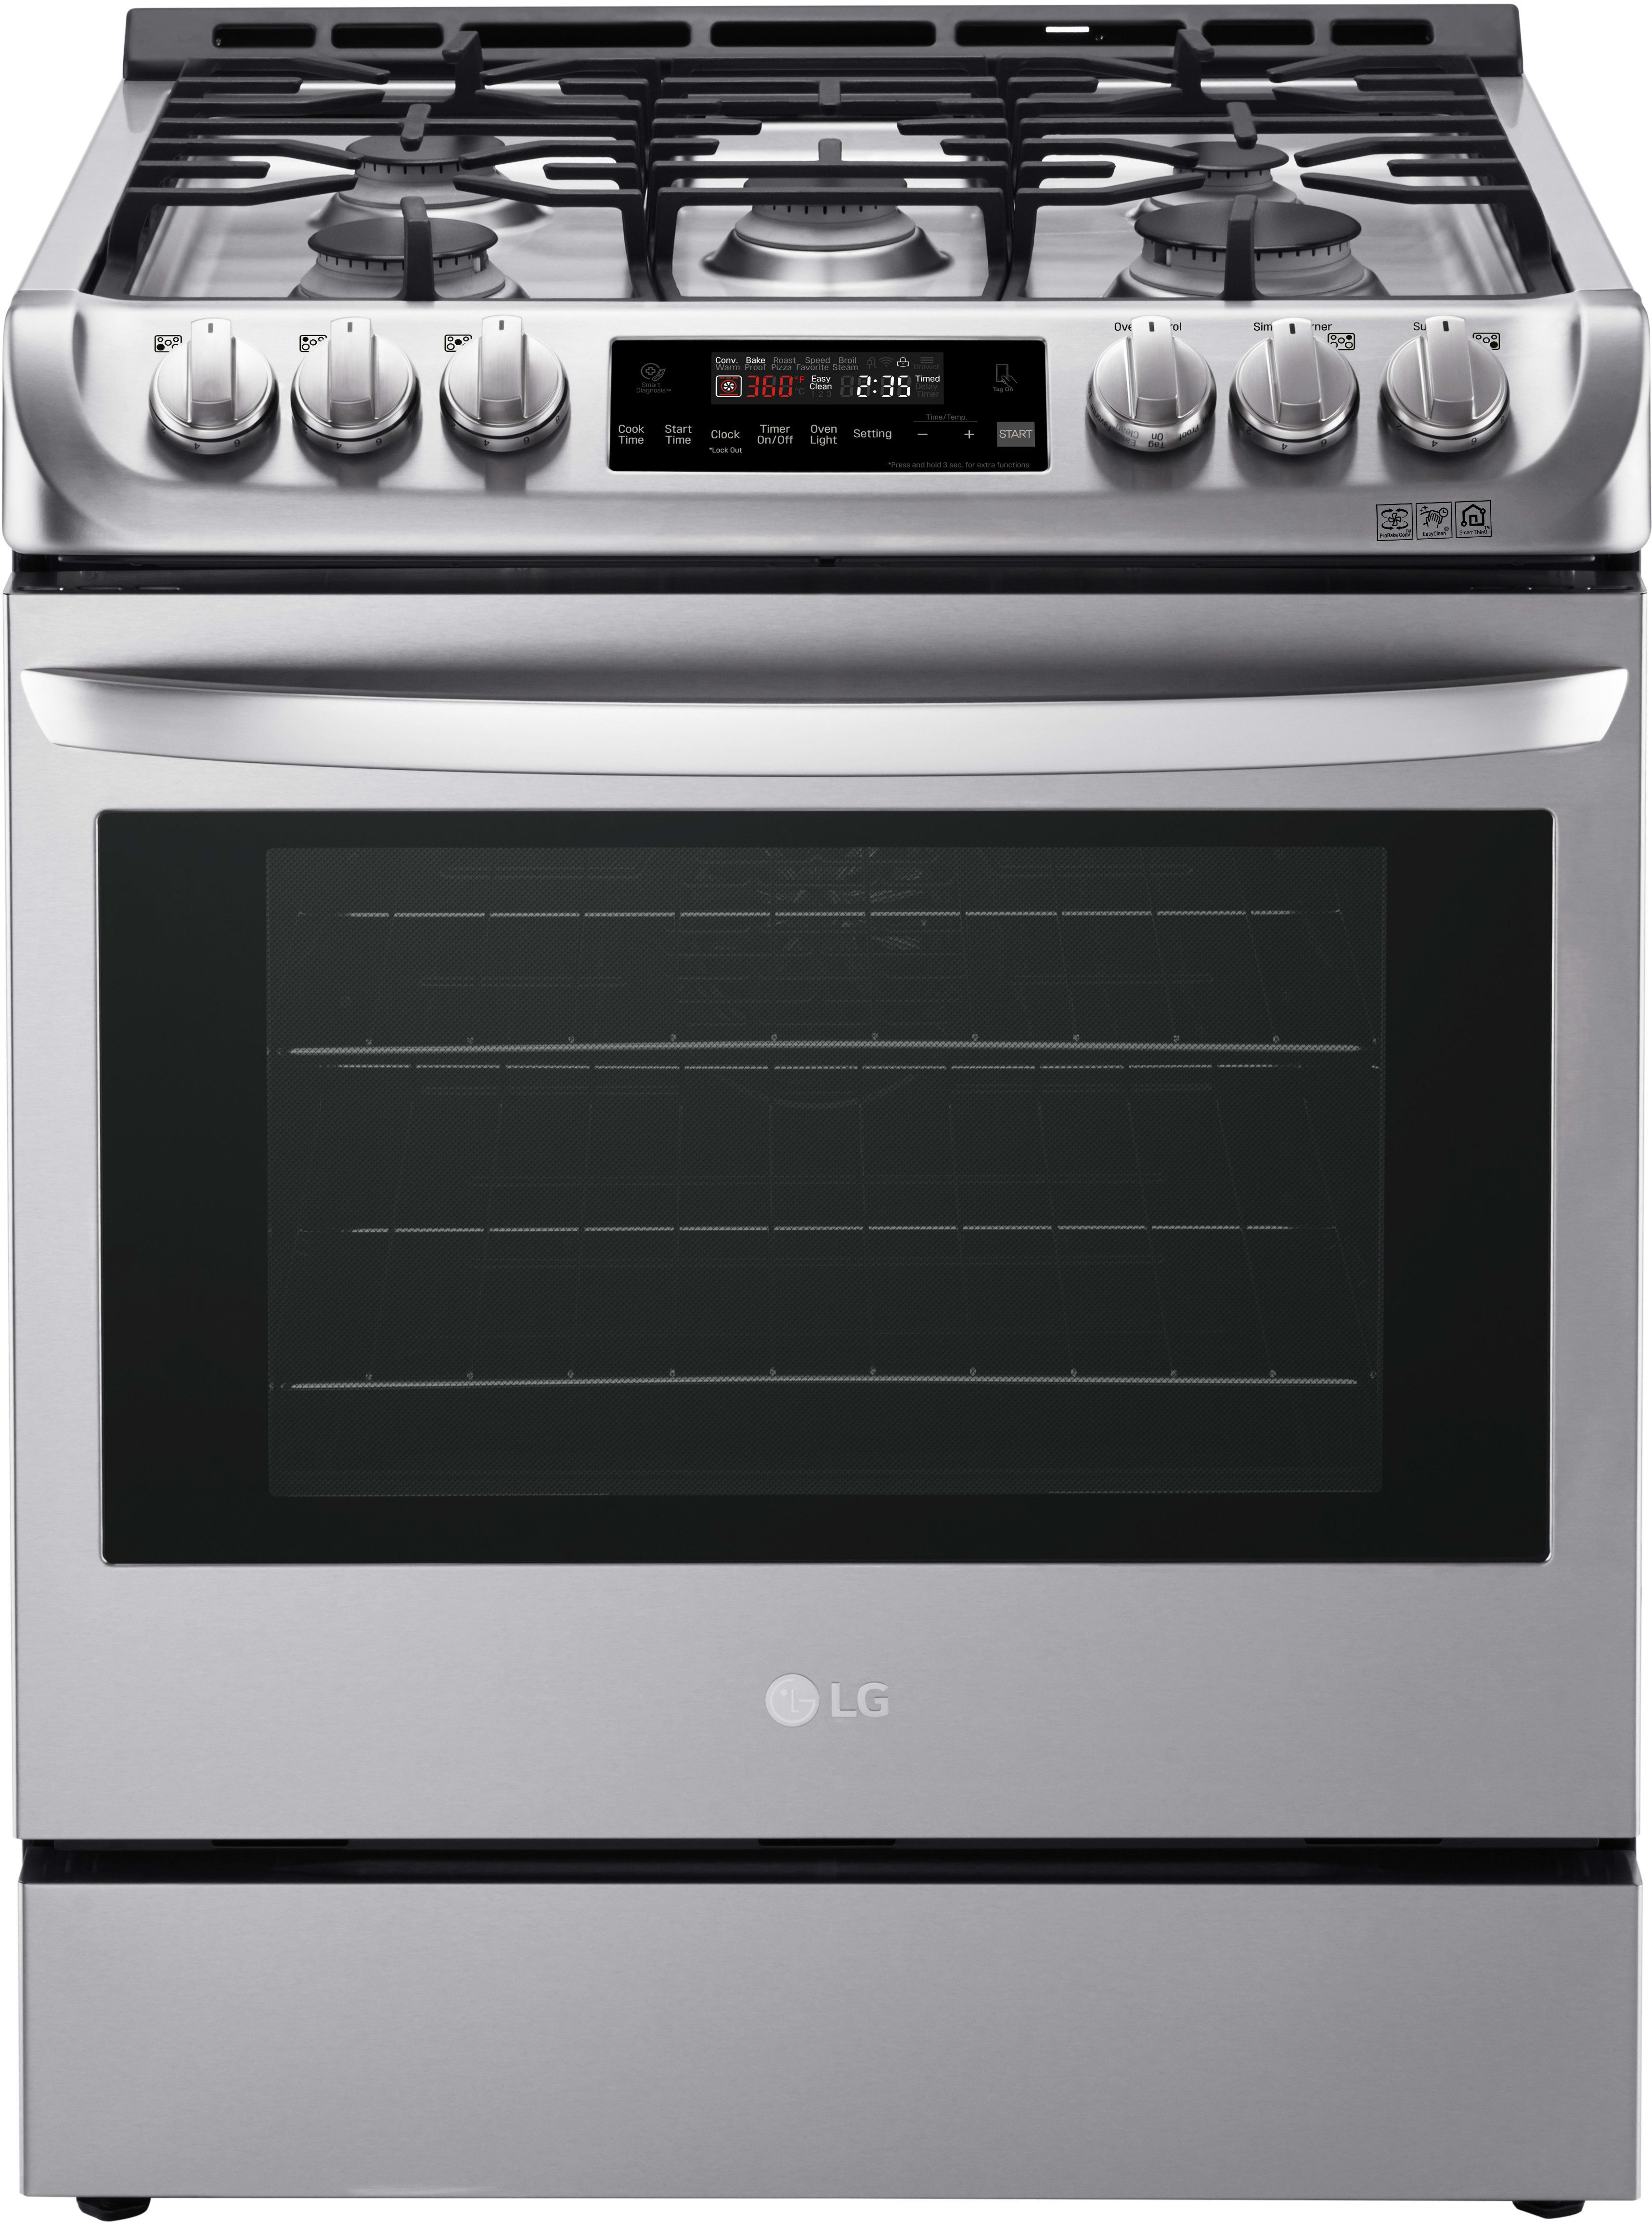 LG LSG4511ST 30 Inch Gas Slide-In Range with 6.3 cu. ft. Capacity, 5